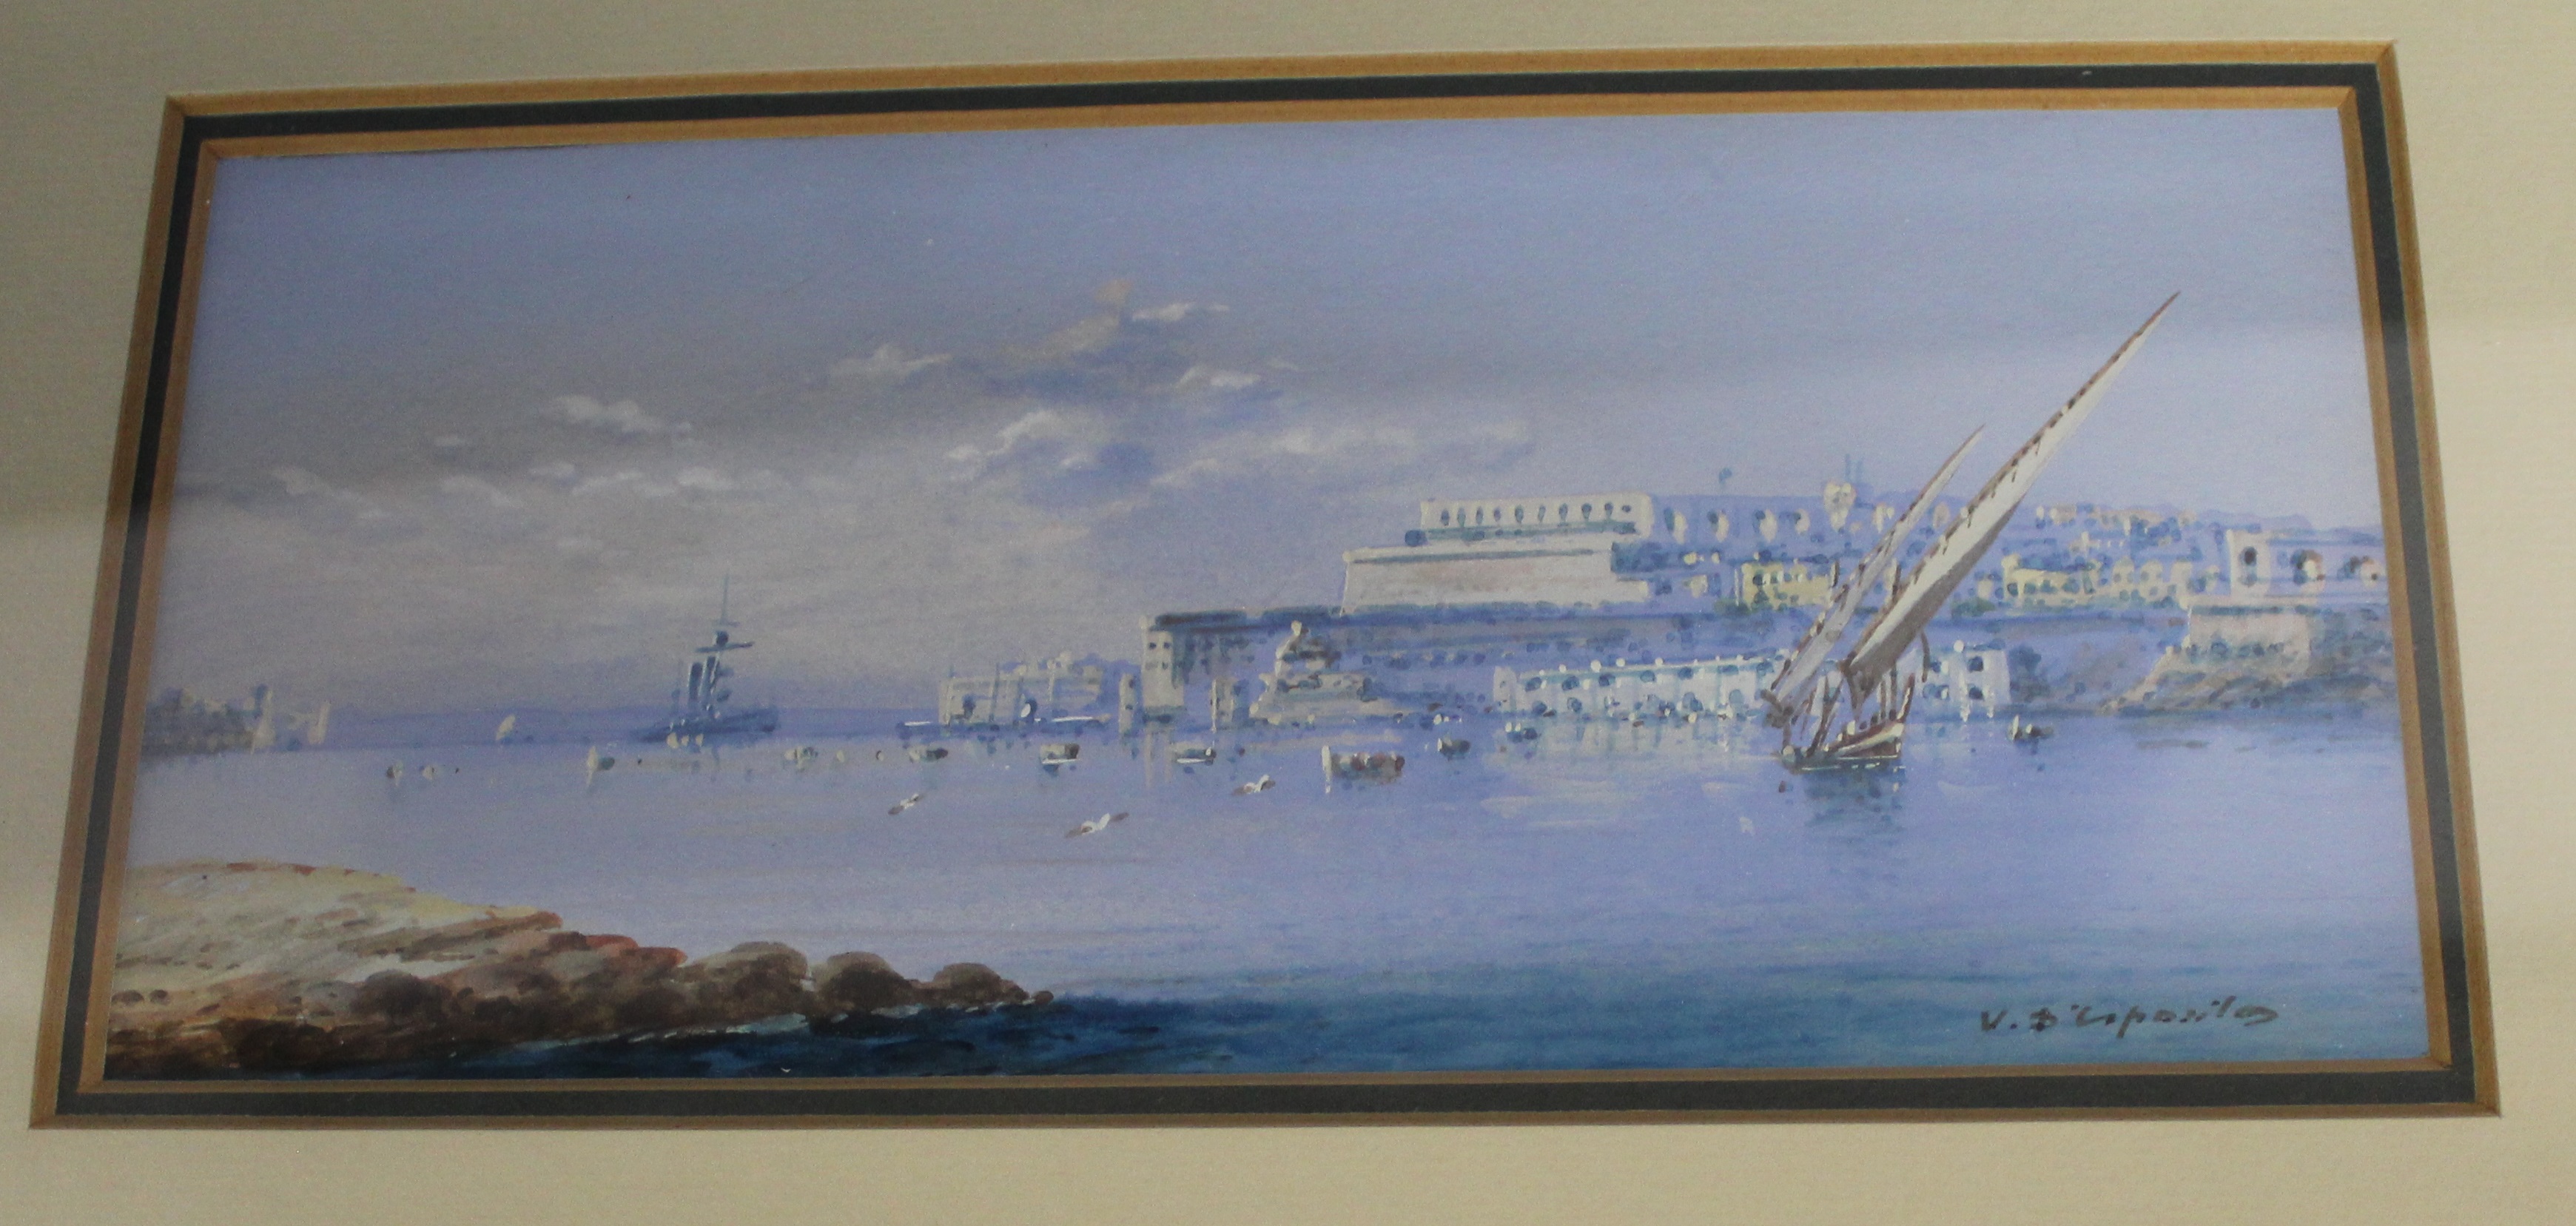 Set of four framed gouache paintings depicting Valetta Harbour by Vincenzo D'Esposito (Maltese - Image 6 of 7